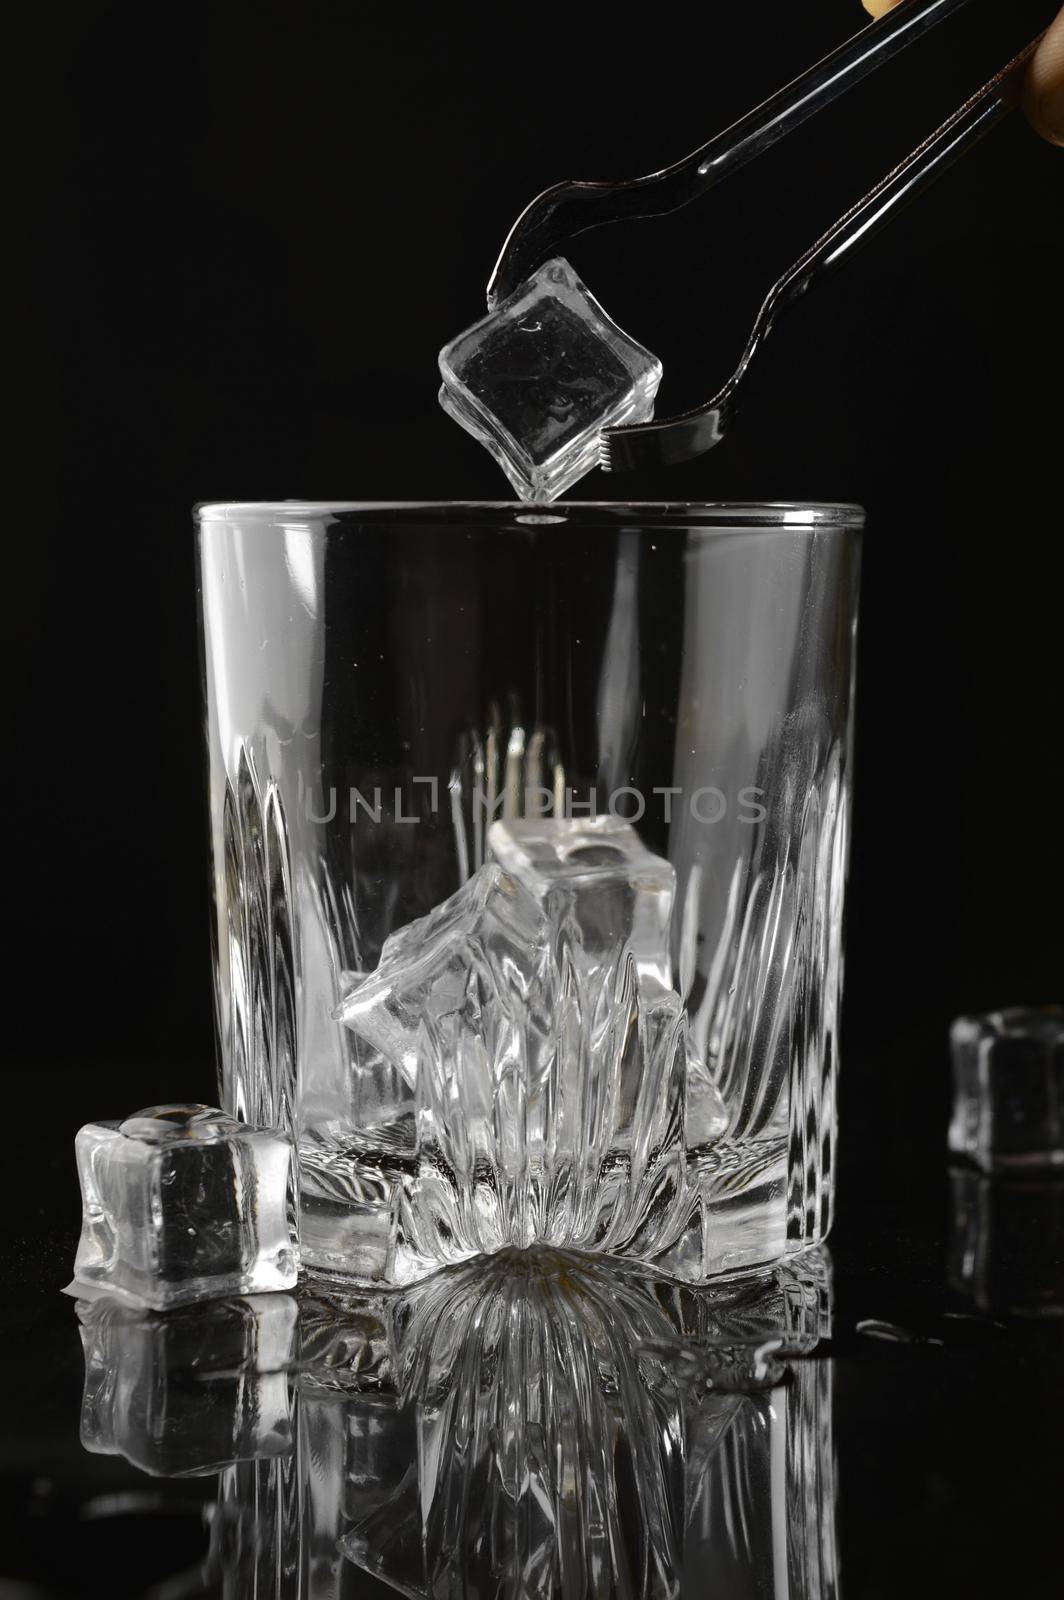 A hand adding some fresh ice with tongs into a clean whiskey glass over a black reflective background.